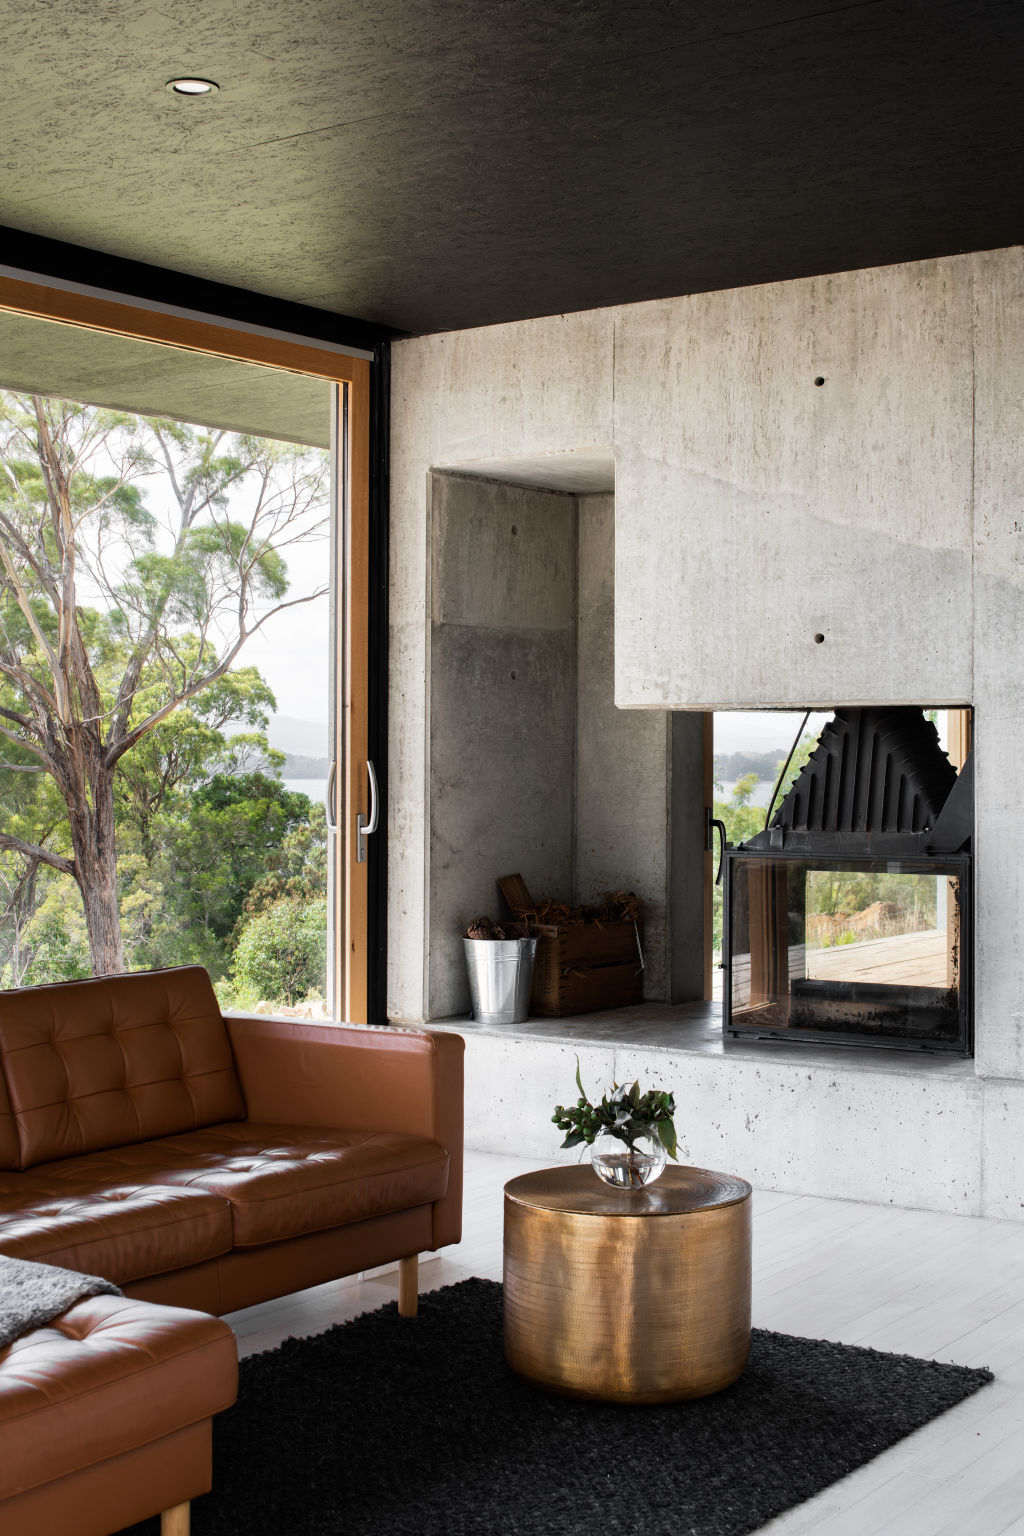 The concrete fireplace is inspired by the owners’ love of Japanese aesthetics and doubles as a room divider. Photo: Anjie Blair